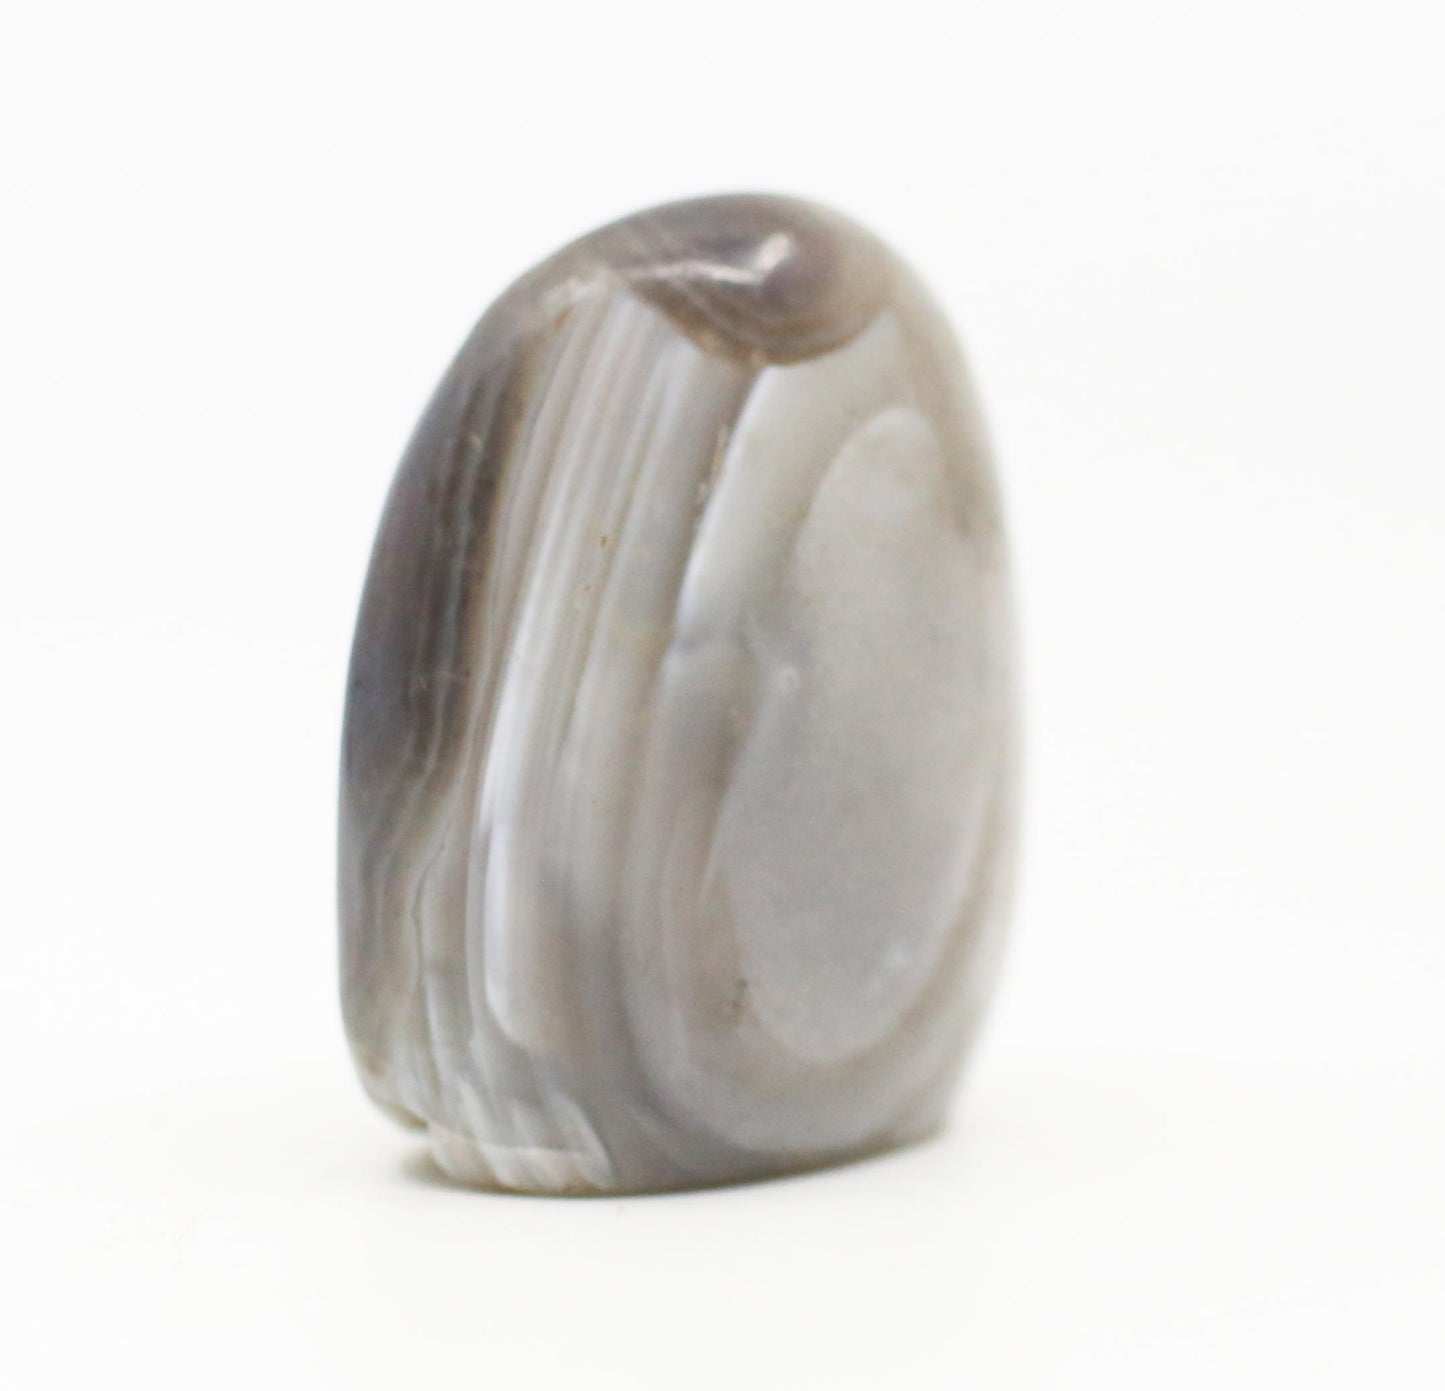 River Agate Free Form